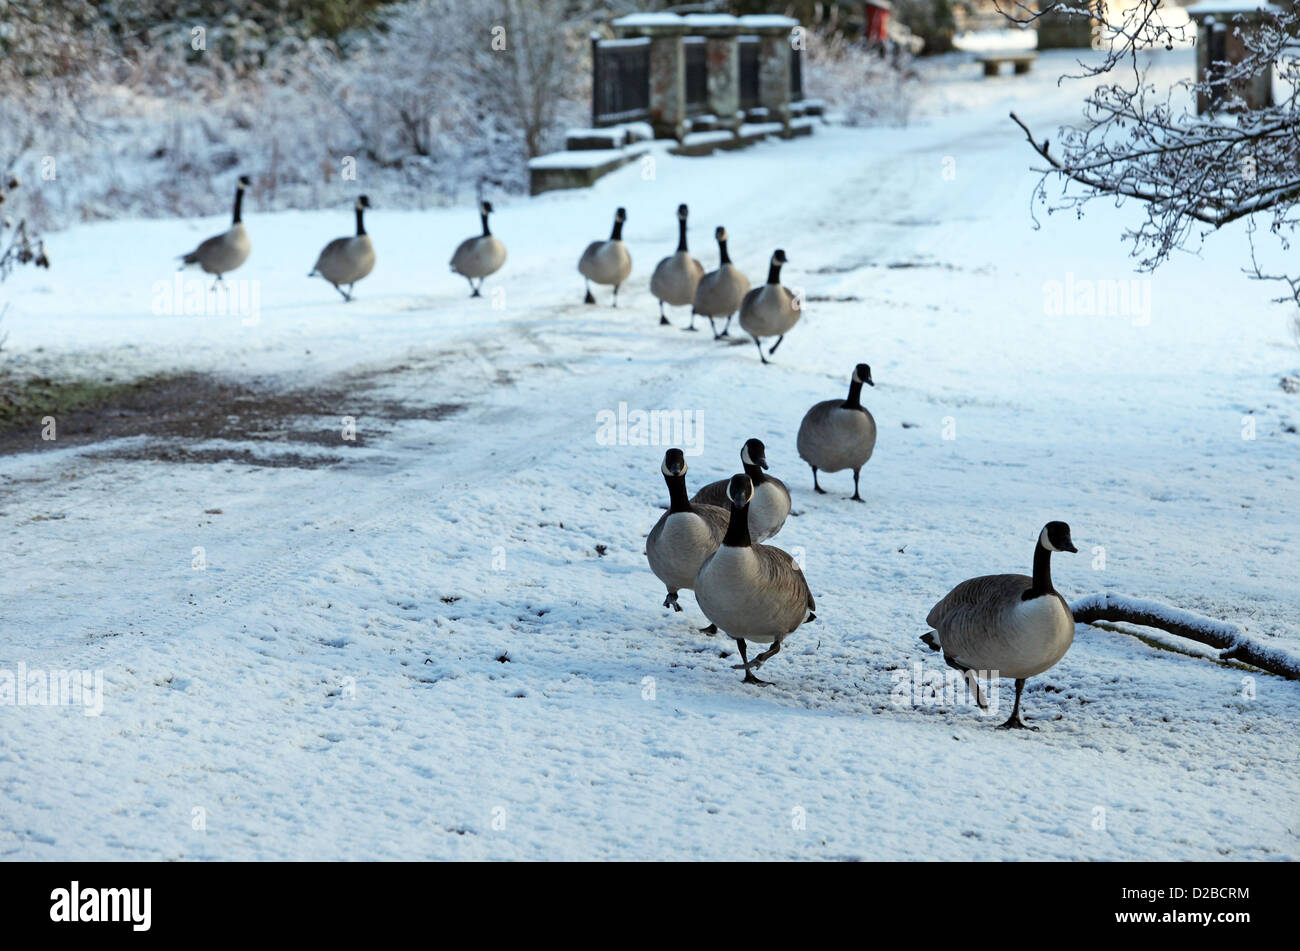 Wild Canada Geese walking across snow in a single file line in winter in the United Kingdom Stock Photo